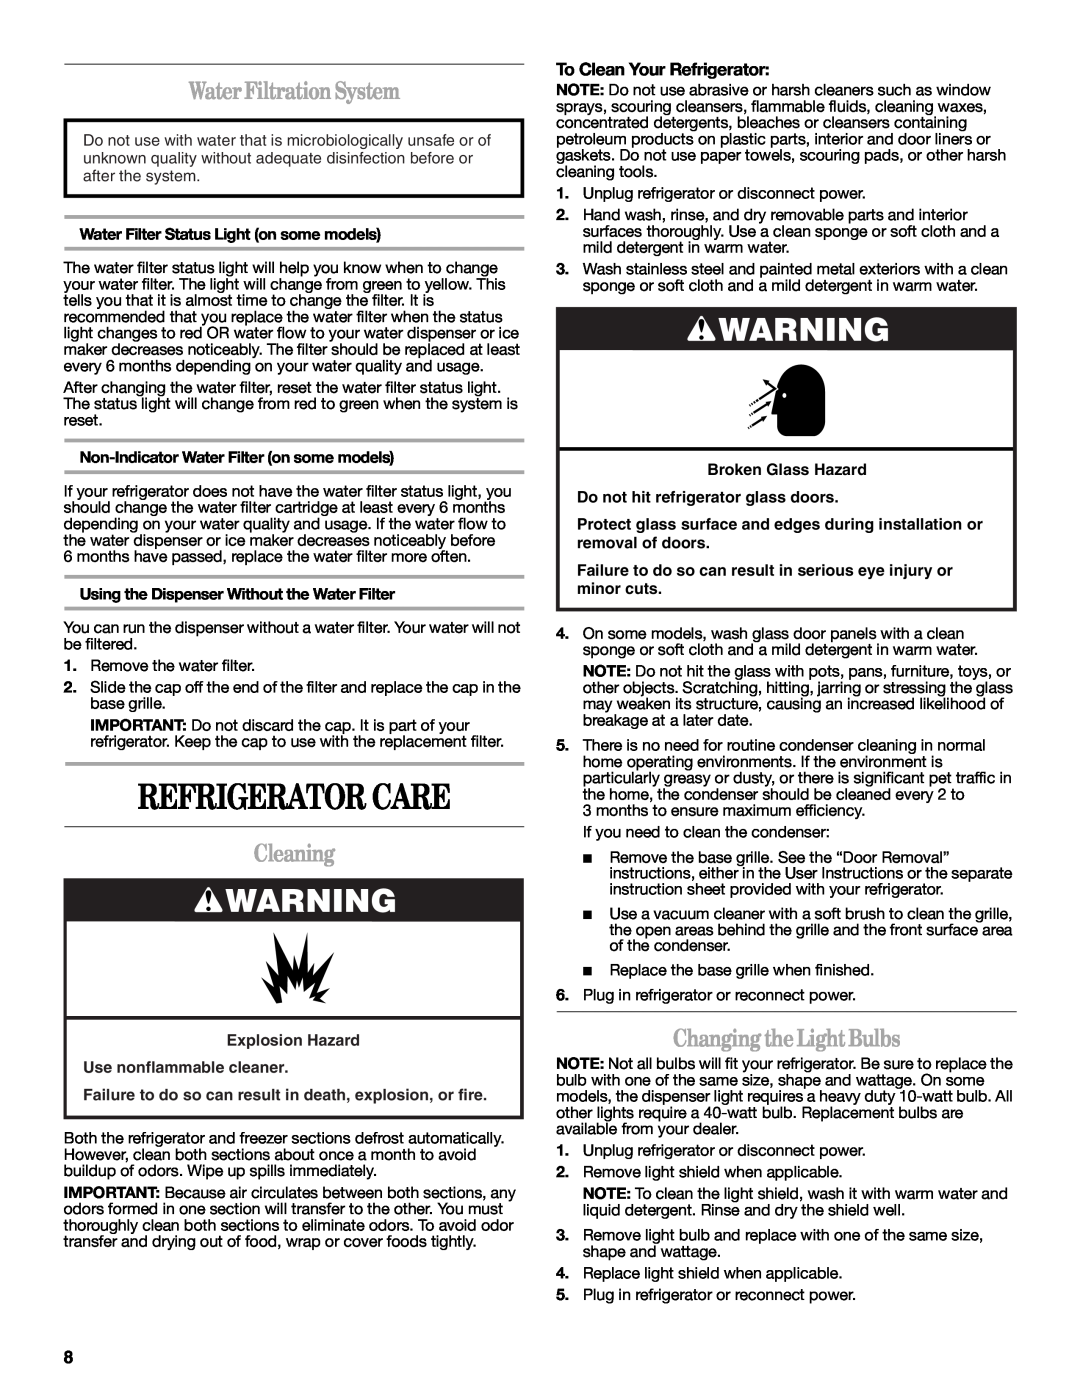 Amana W10321485A installation instructions Refrigerator Care, Water Filtration System, Cleaning, Changing the Light Bulbs 